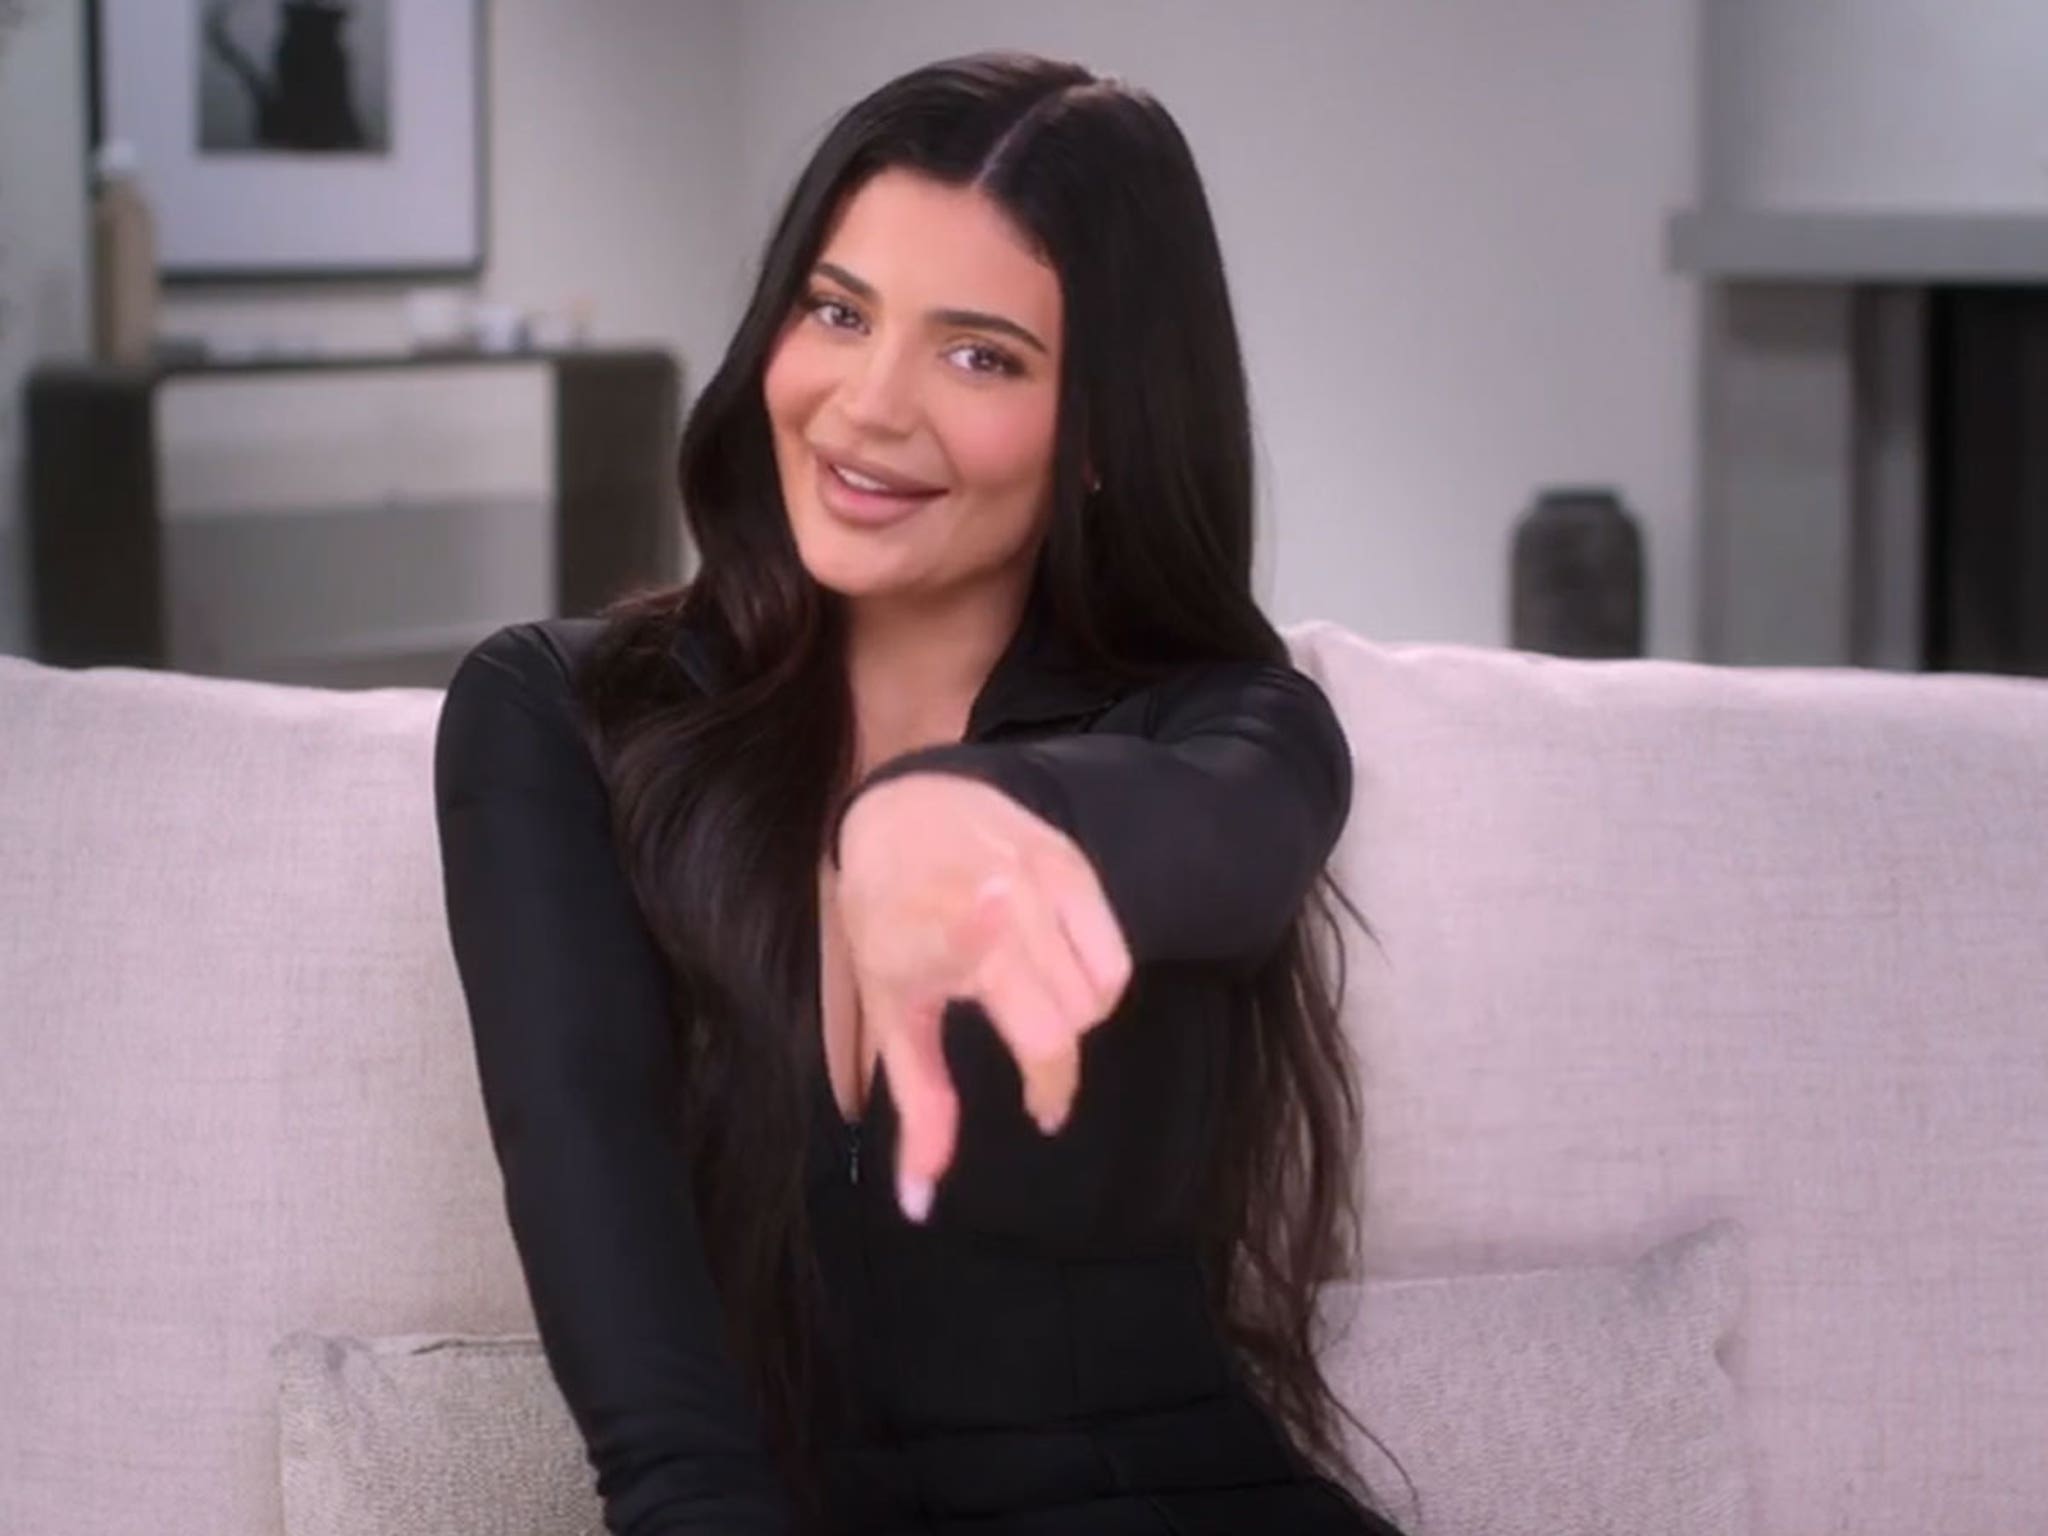 Kylie Jenner Uses Hulu Show to Tease Her Youngest Child's New Name - TMZ (Picture 1)